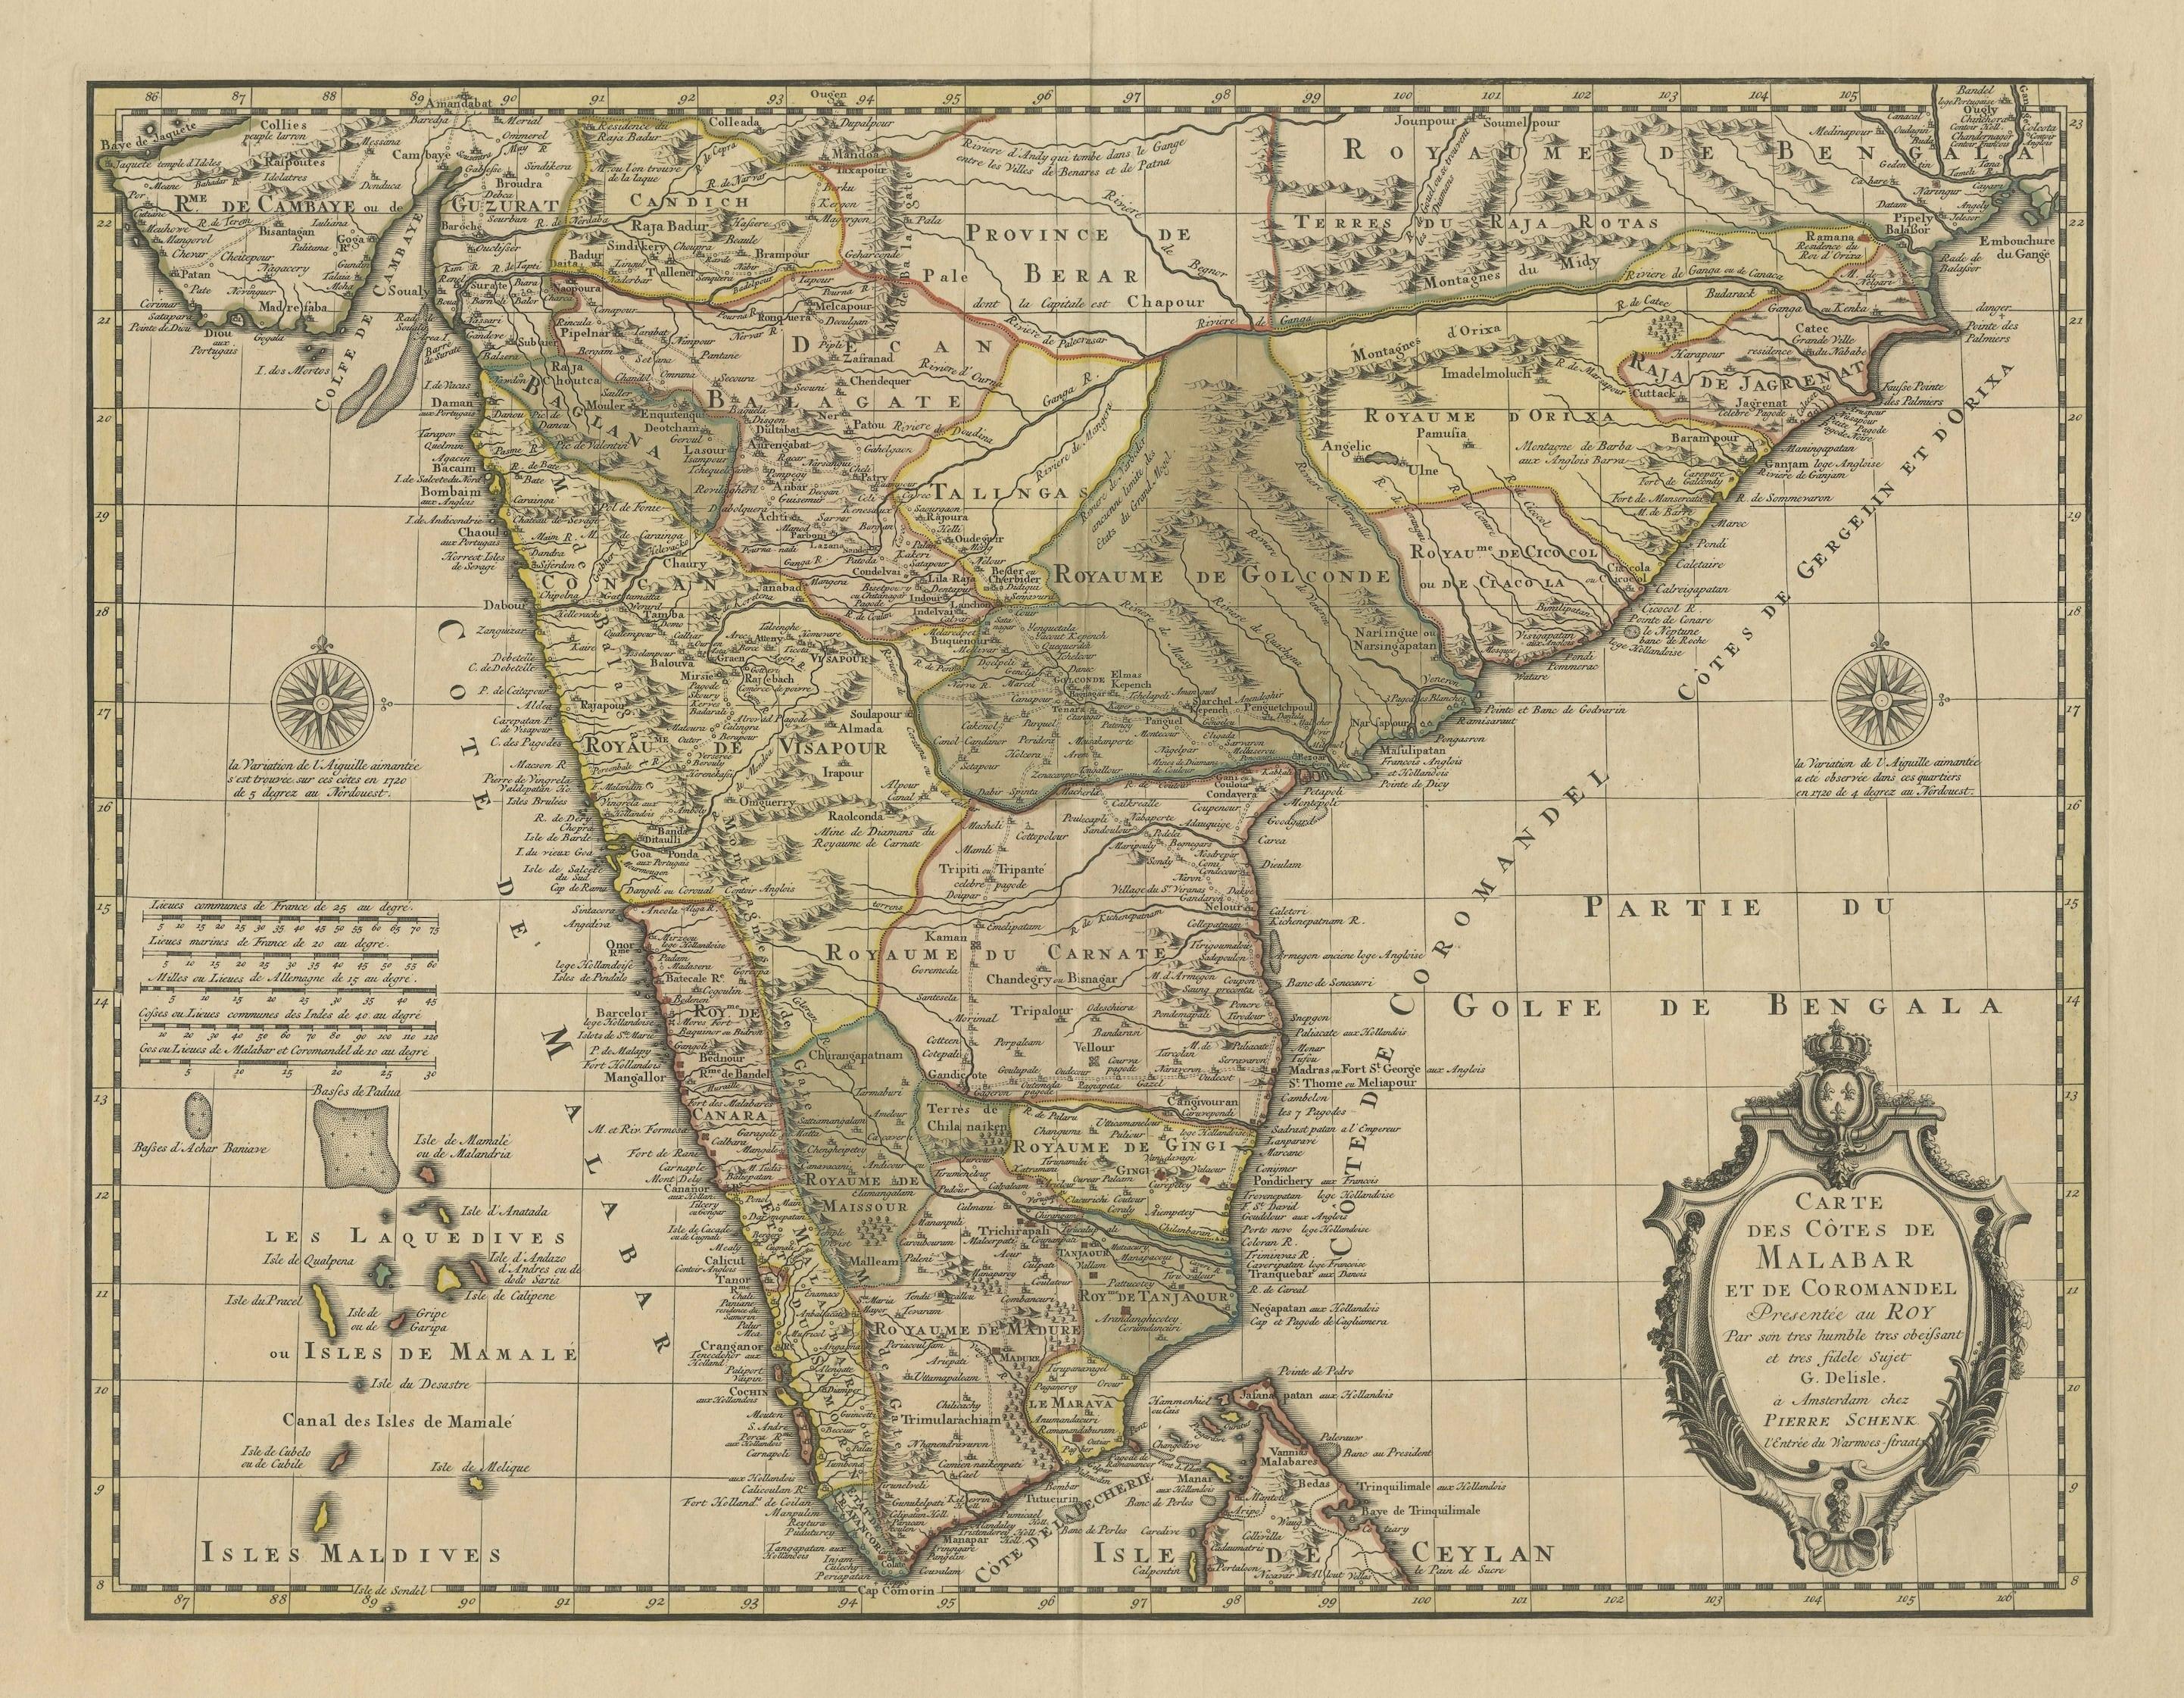 Antique map titled 'Carte des Côtes de Malabar et de Coromandel'. Finely engraved map of the southern part of India, first issued in 1723 by acclaimed French mapmaker Guillaume De L’Isle. It focuses on trade routes within India, as well as the